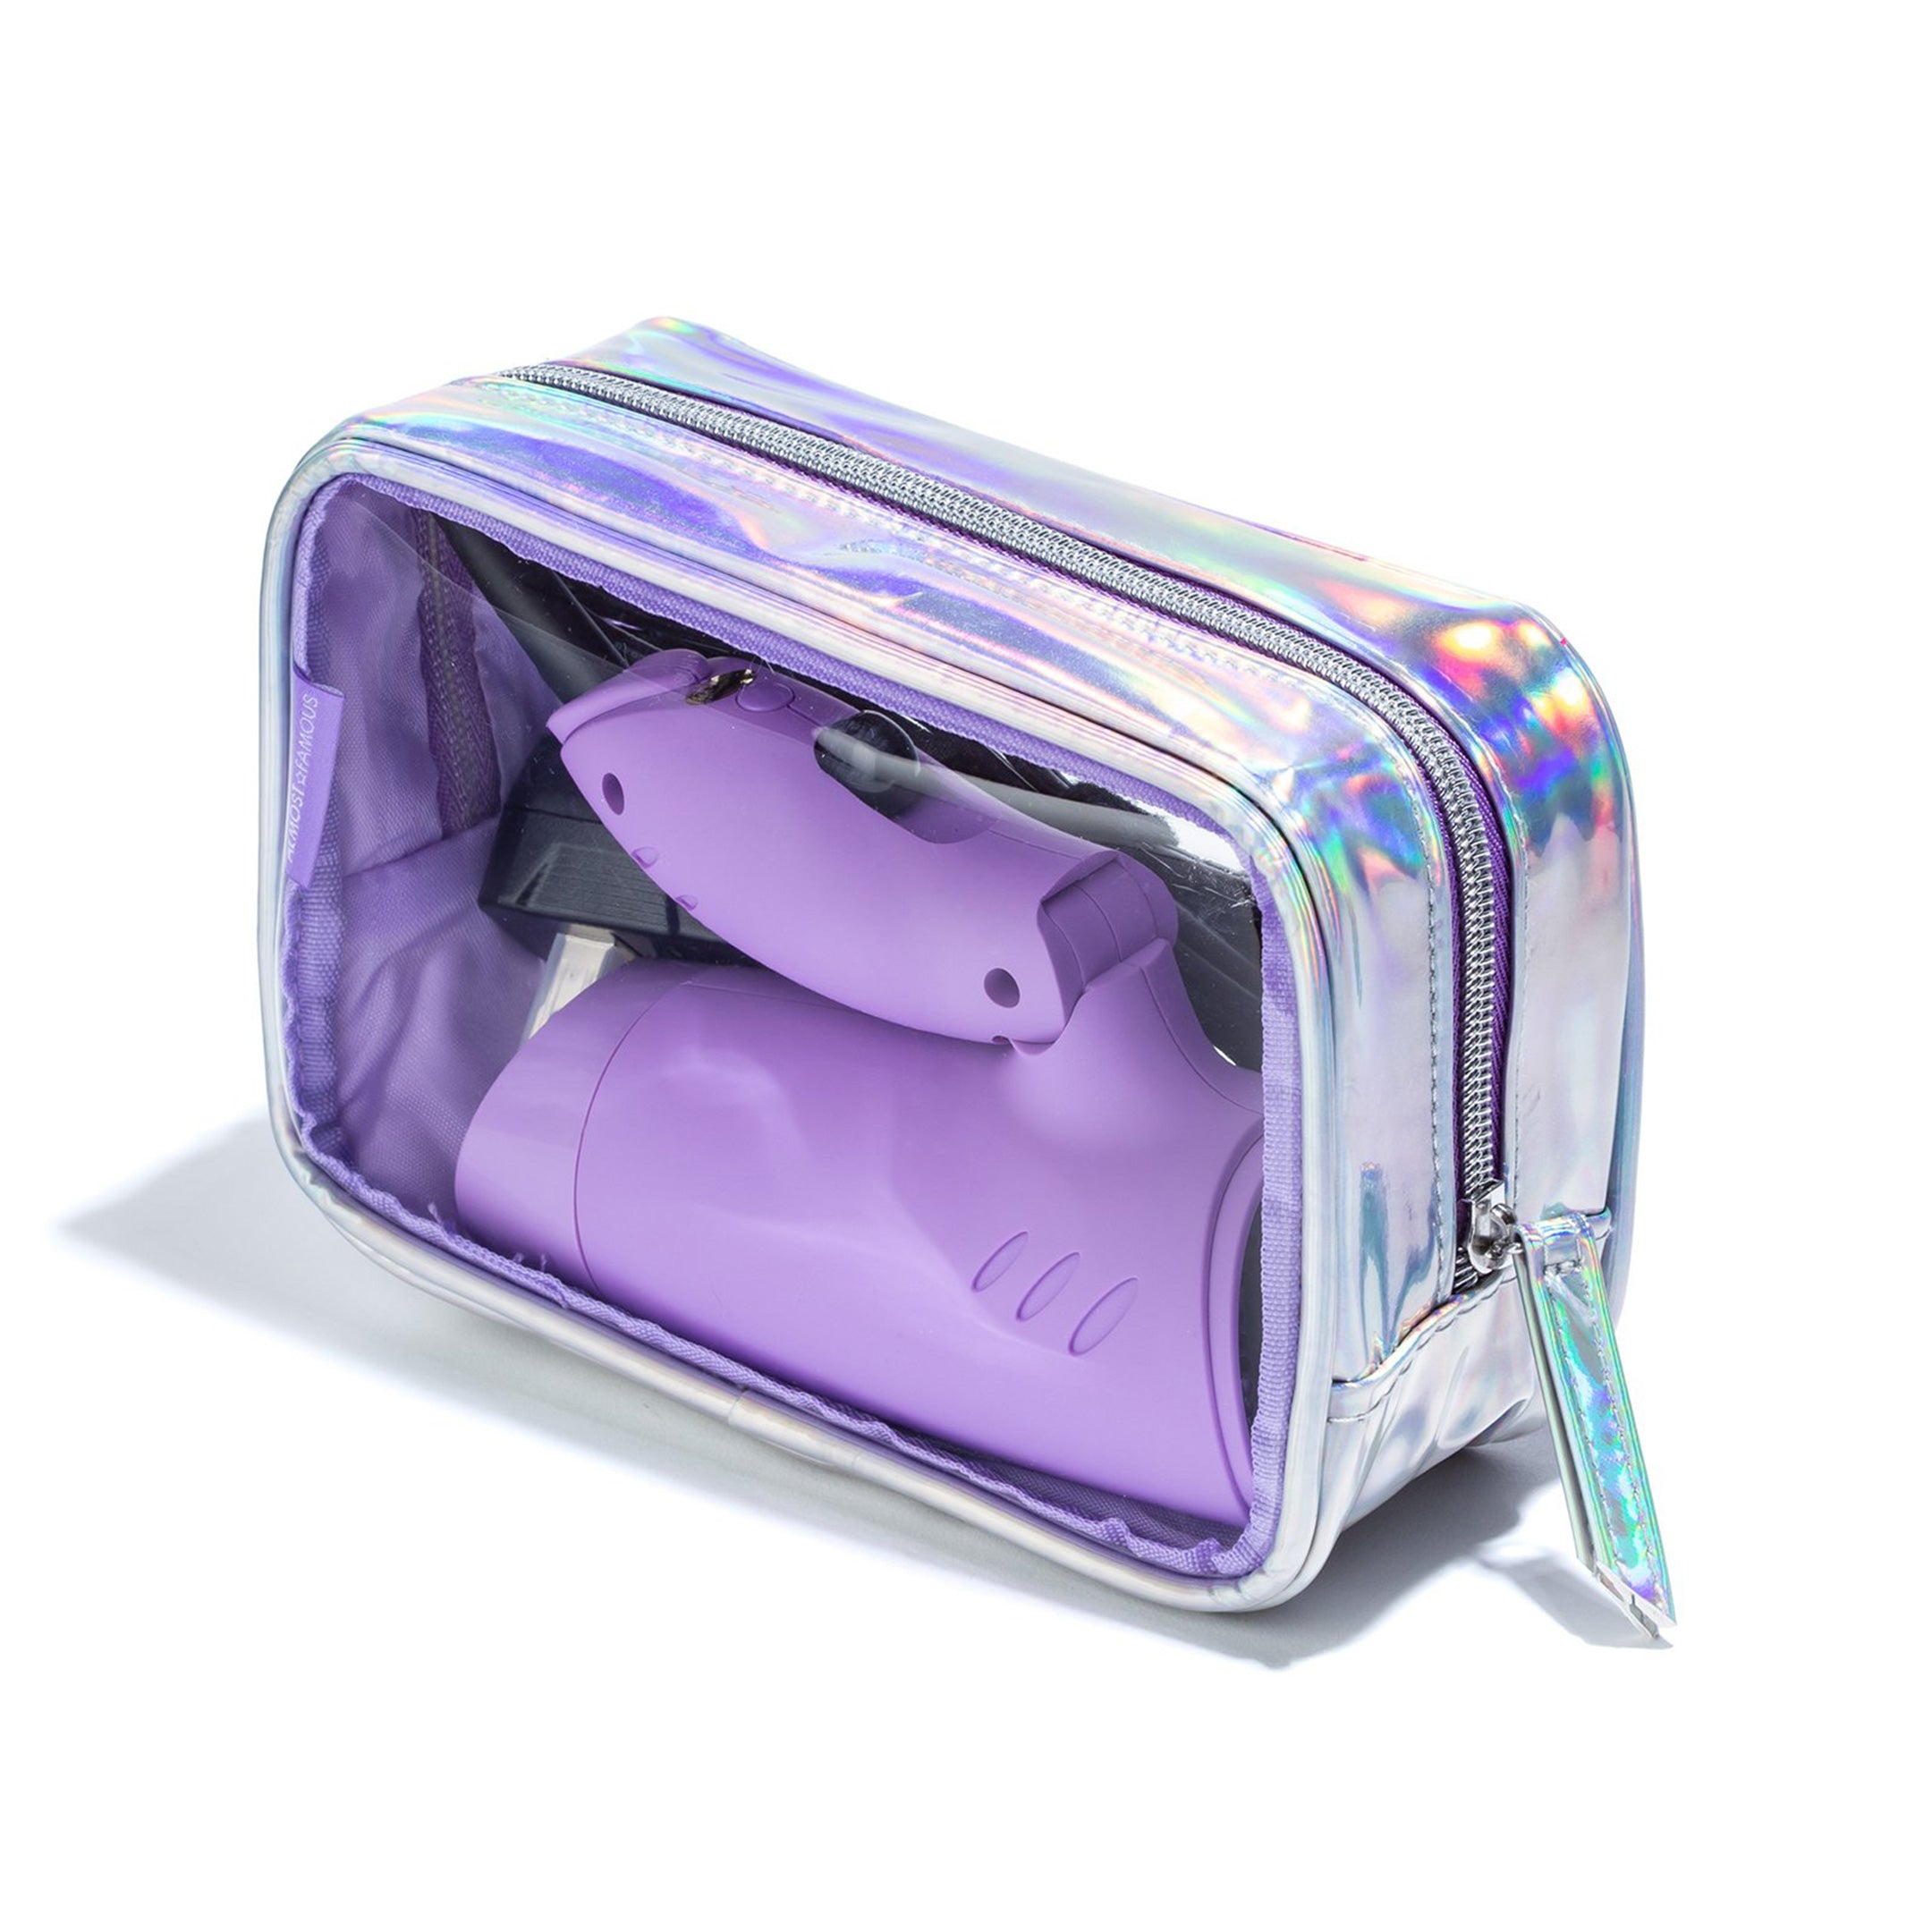 Mighty AF Mini Travel Dryer with Holotone Carrying Bag